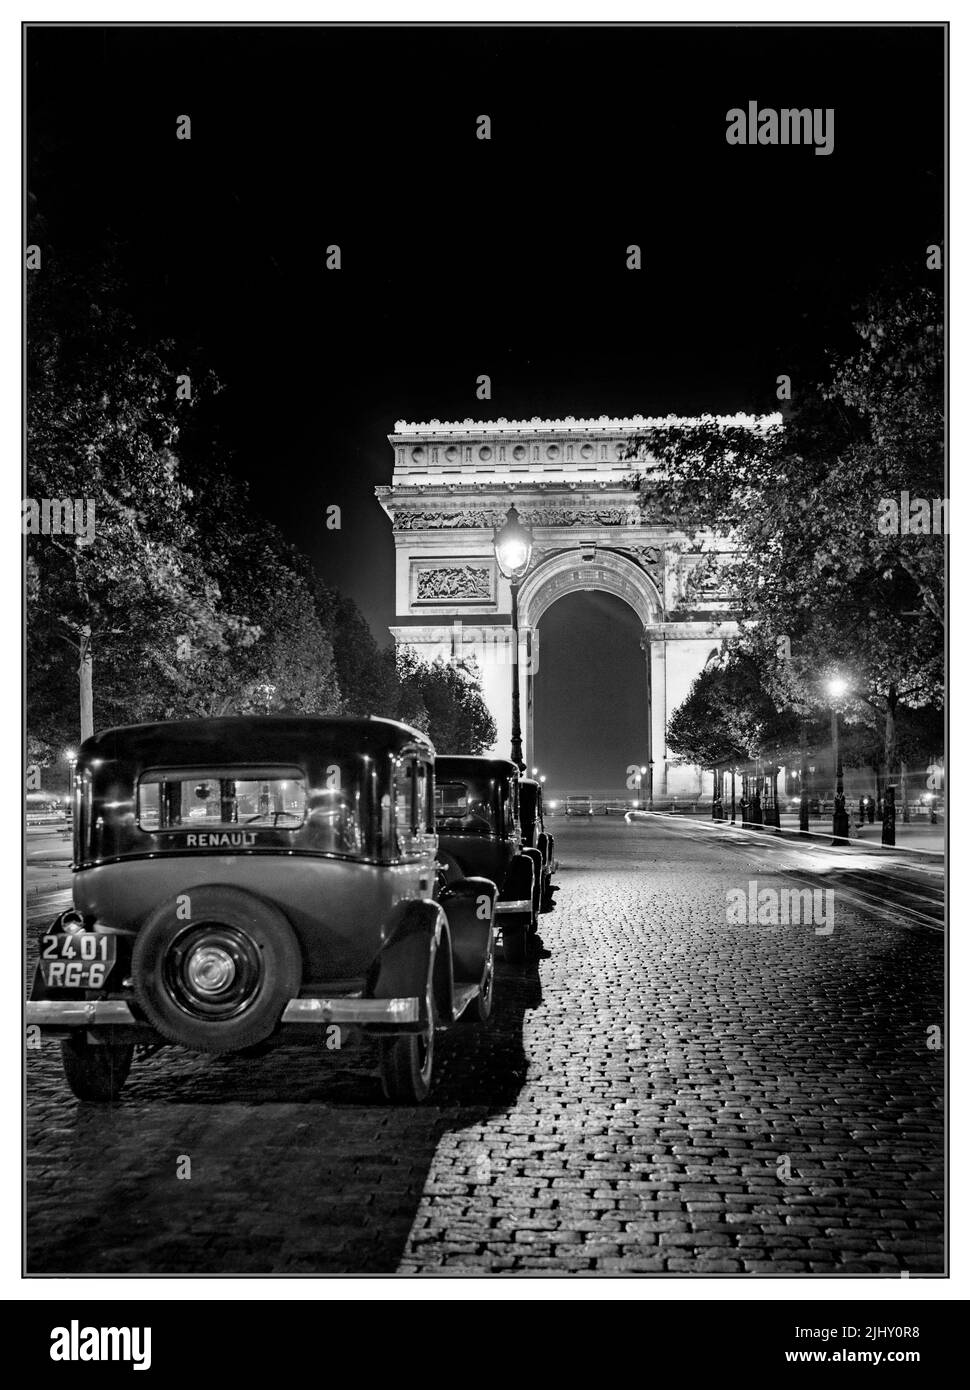 Vintage 1930s Paris and The Arc de Triomphe at night with a line of French Renault Taxis in line on the Champs Elysees Paris France Stock Photo